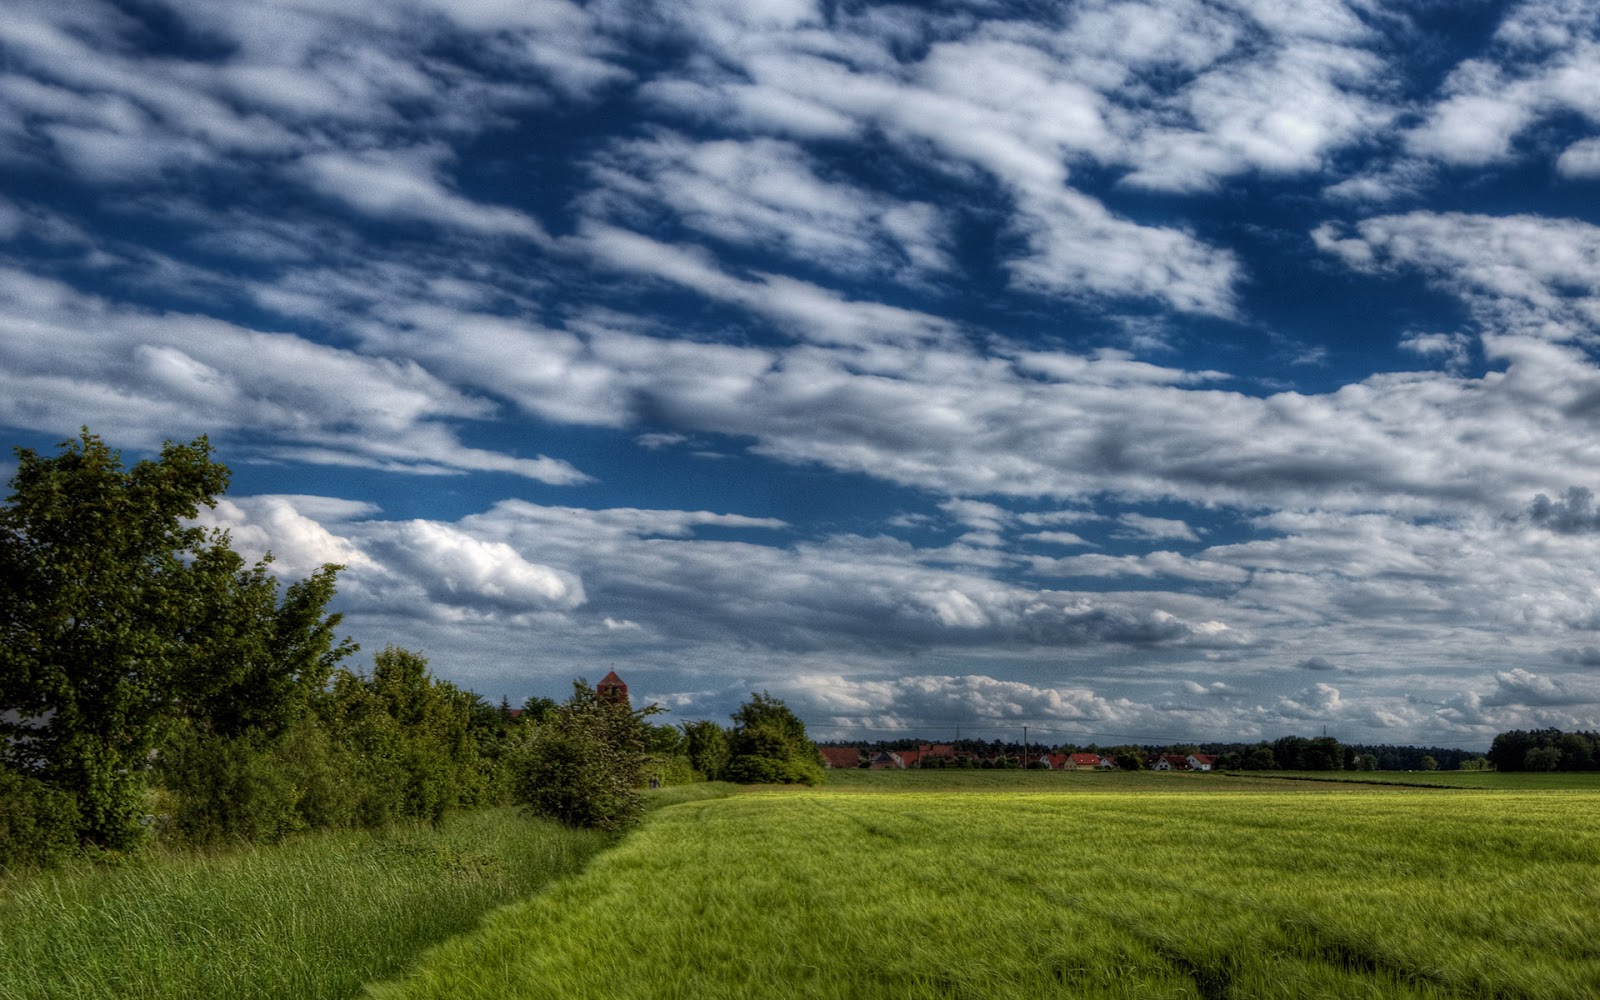 Free Hd Images Fifcu Purchased 19 Clouds And Scenary Images Hdr